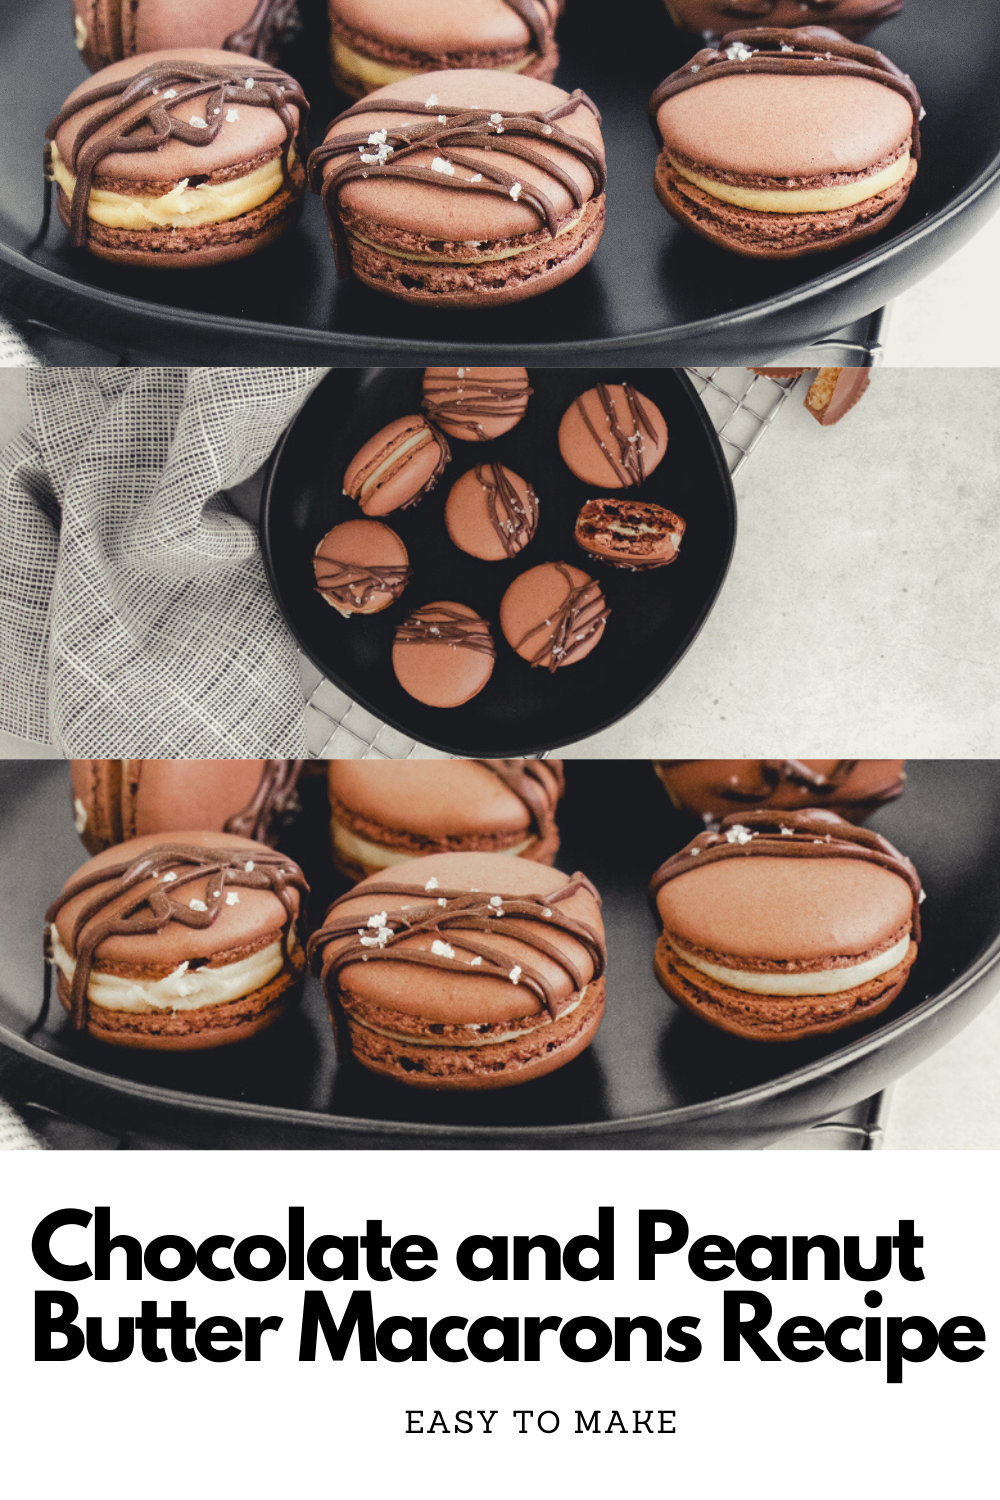 Chocolate and Peanut Butter Macarons